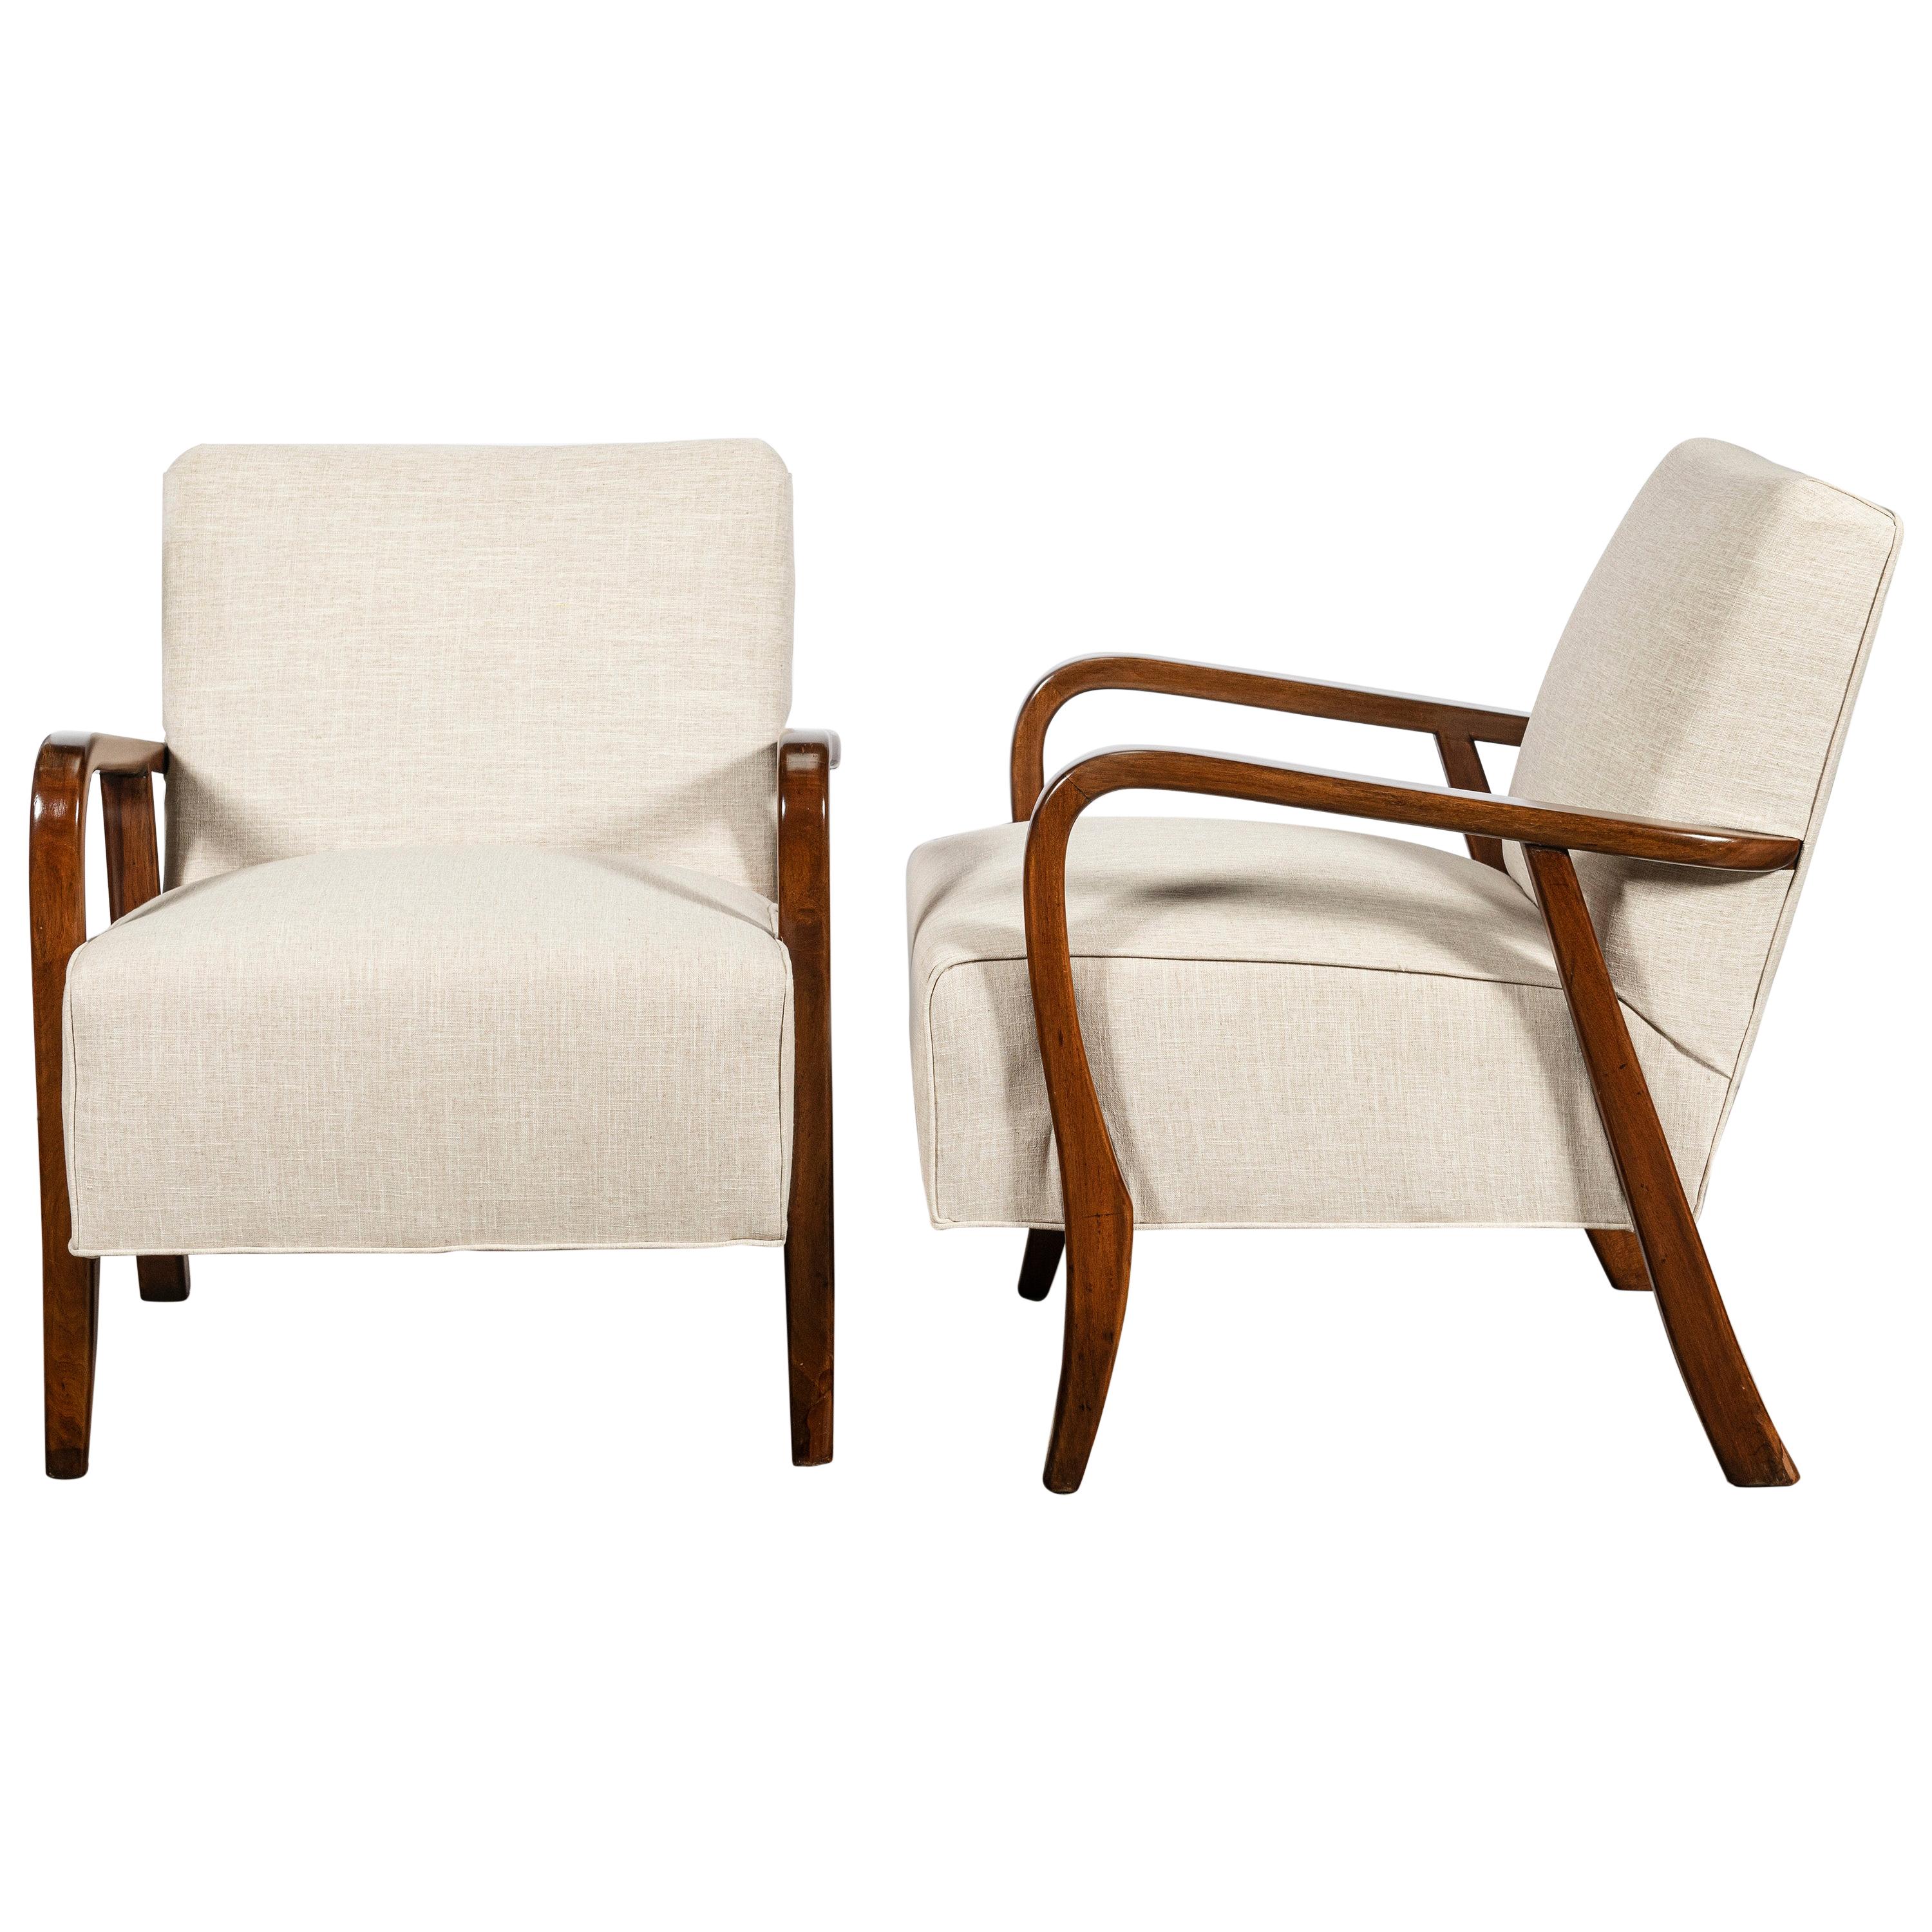 Pair of Wood and Fabric Armchairs by Nordiska, Argentina, circa 1950